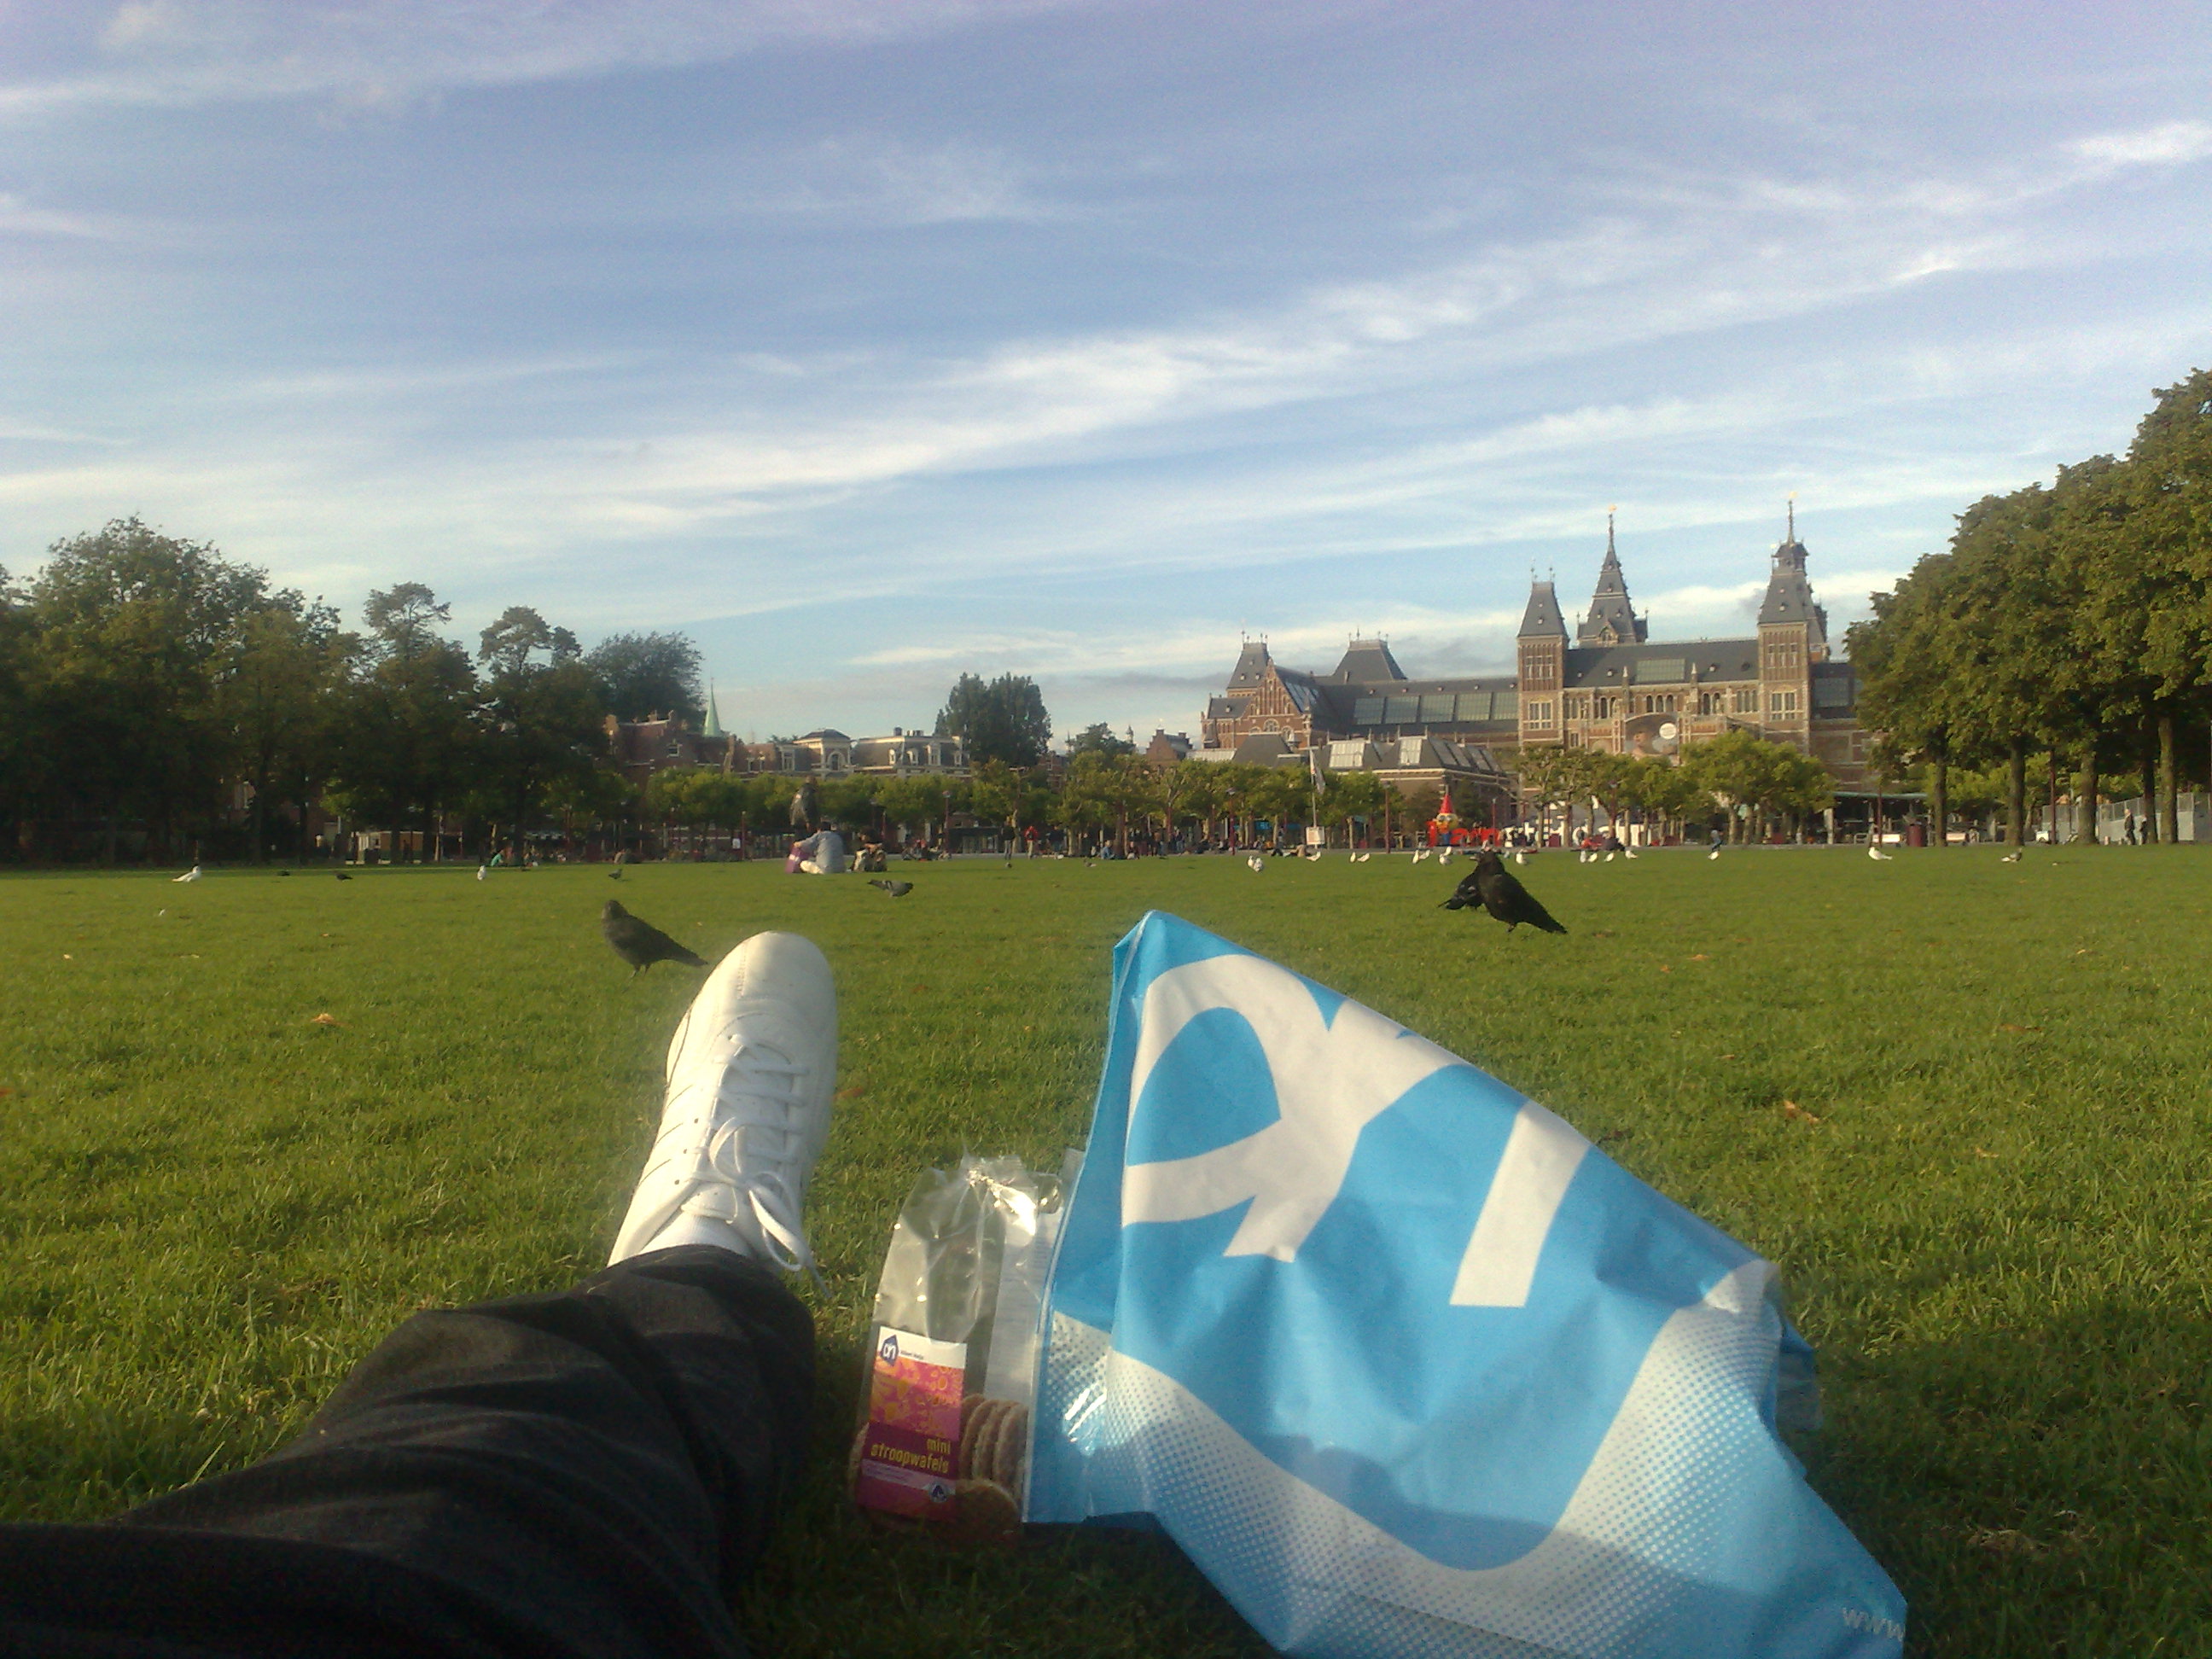 Picnic in the park - Albert Heijn bag, stroopwaffels and me on the Museumsplein :)